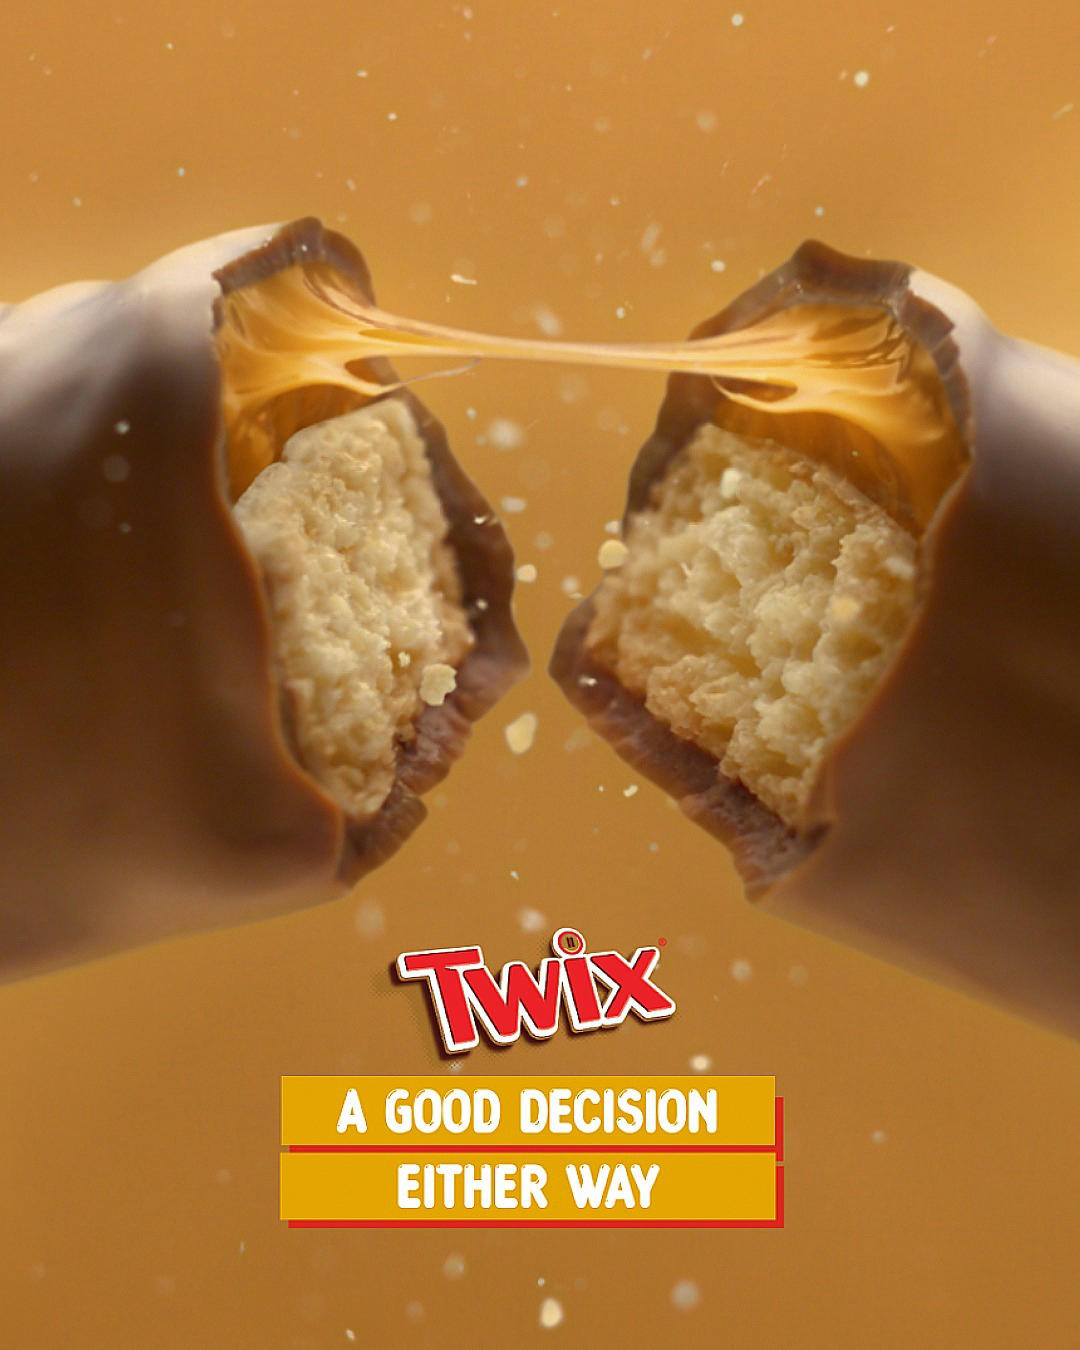 image  1 TWIX - No need to decide anymore